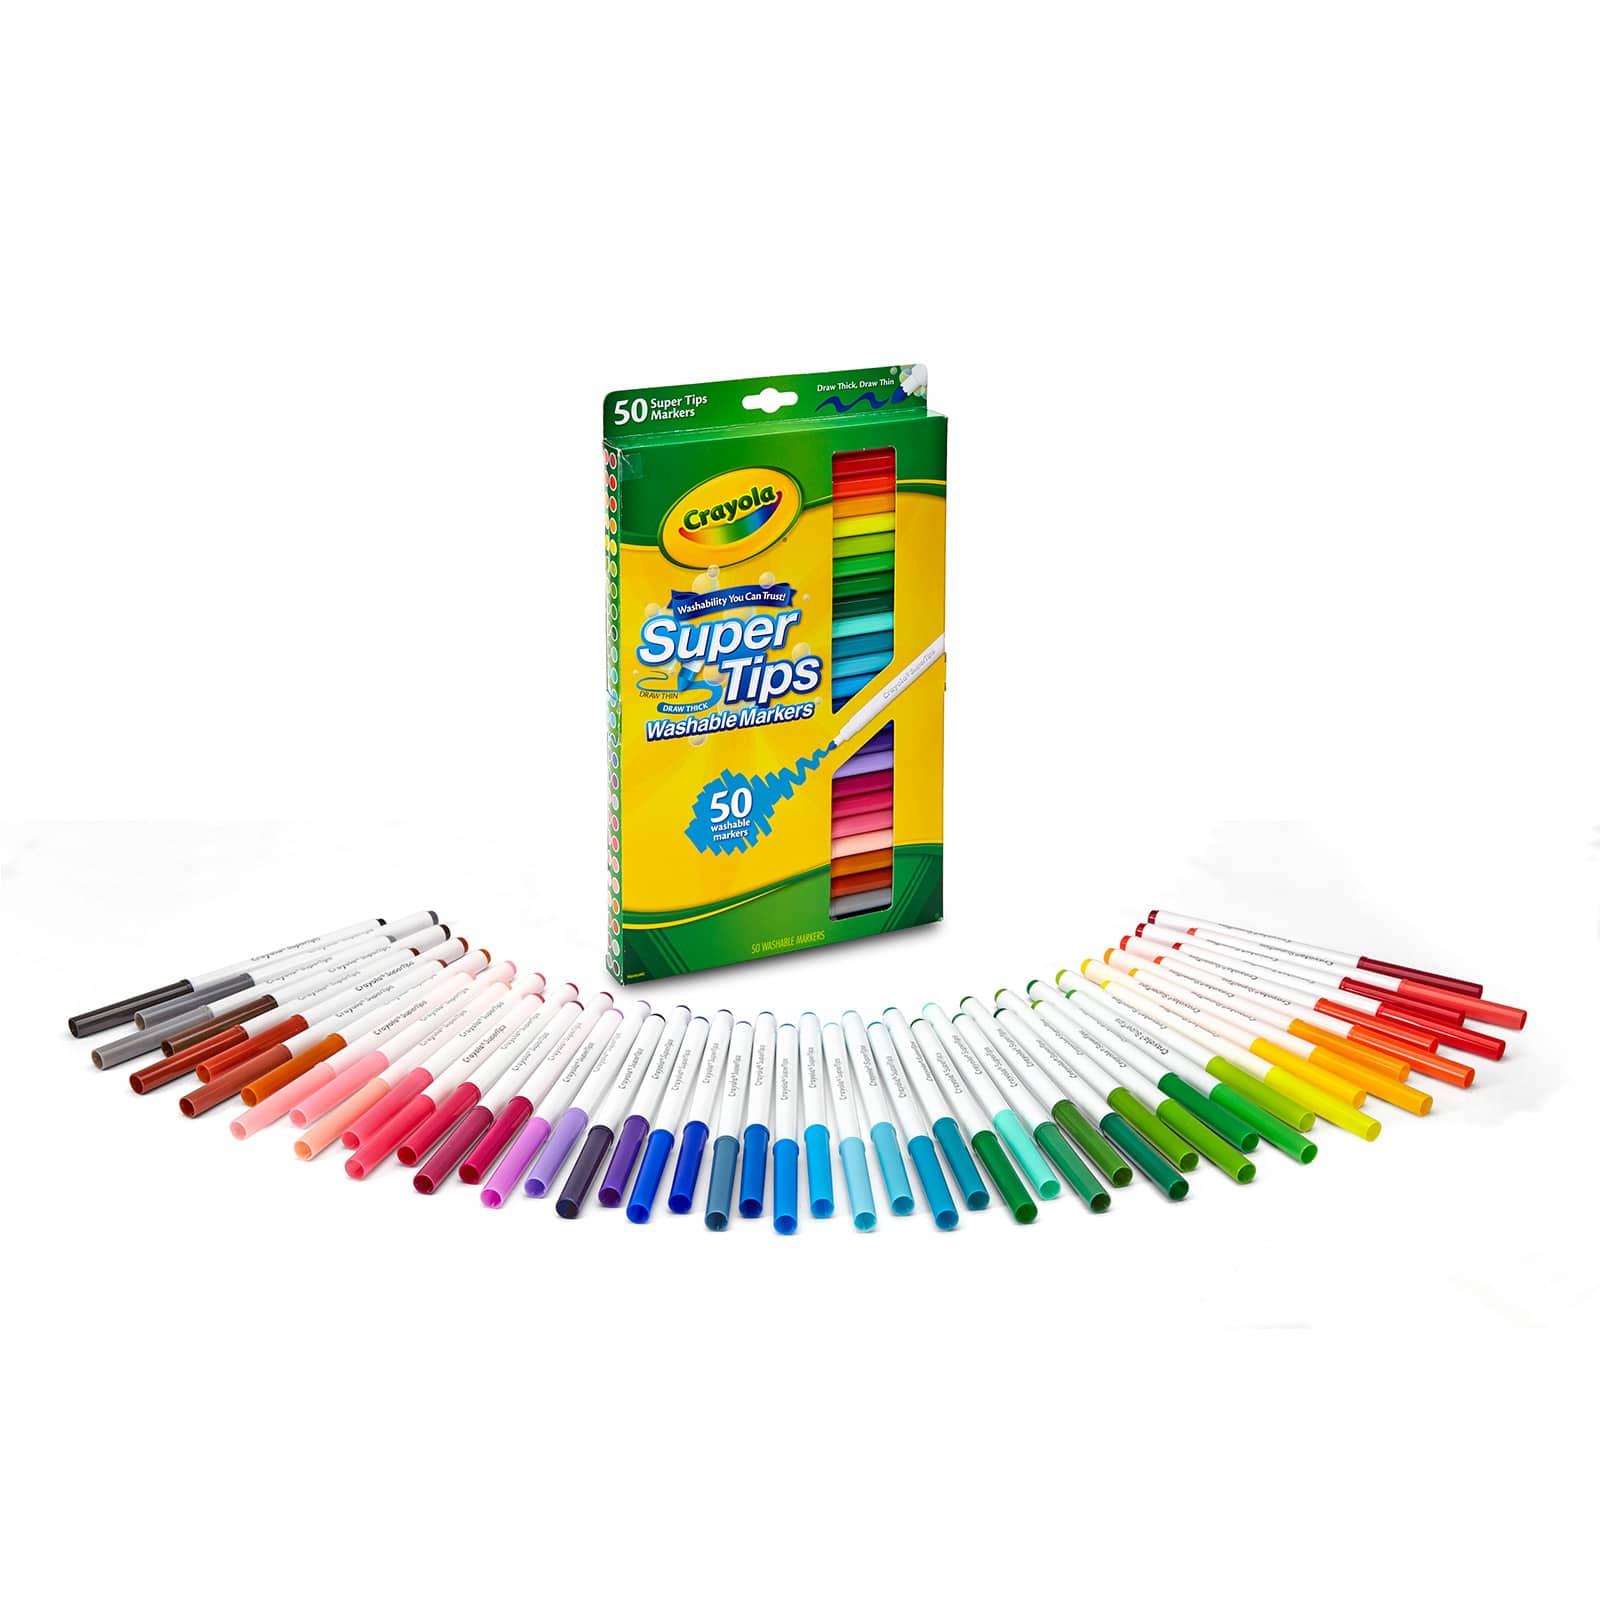 Crayola SuperTips Washable Markers - 50 count